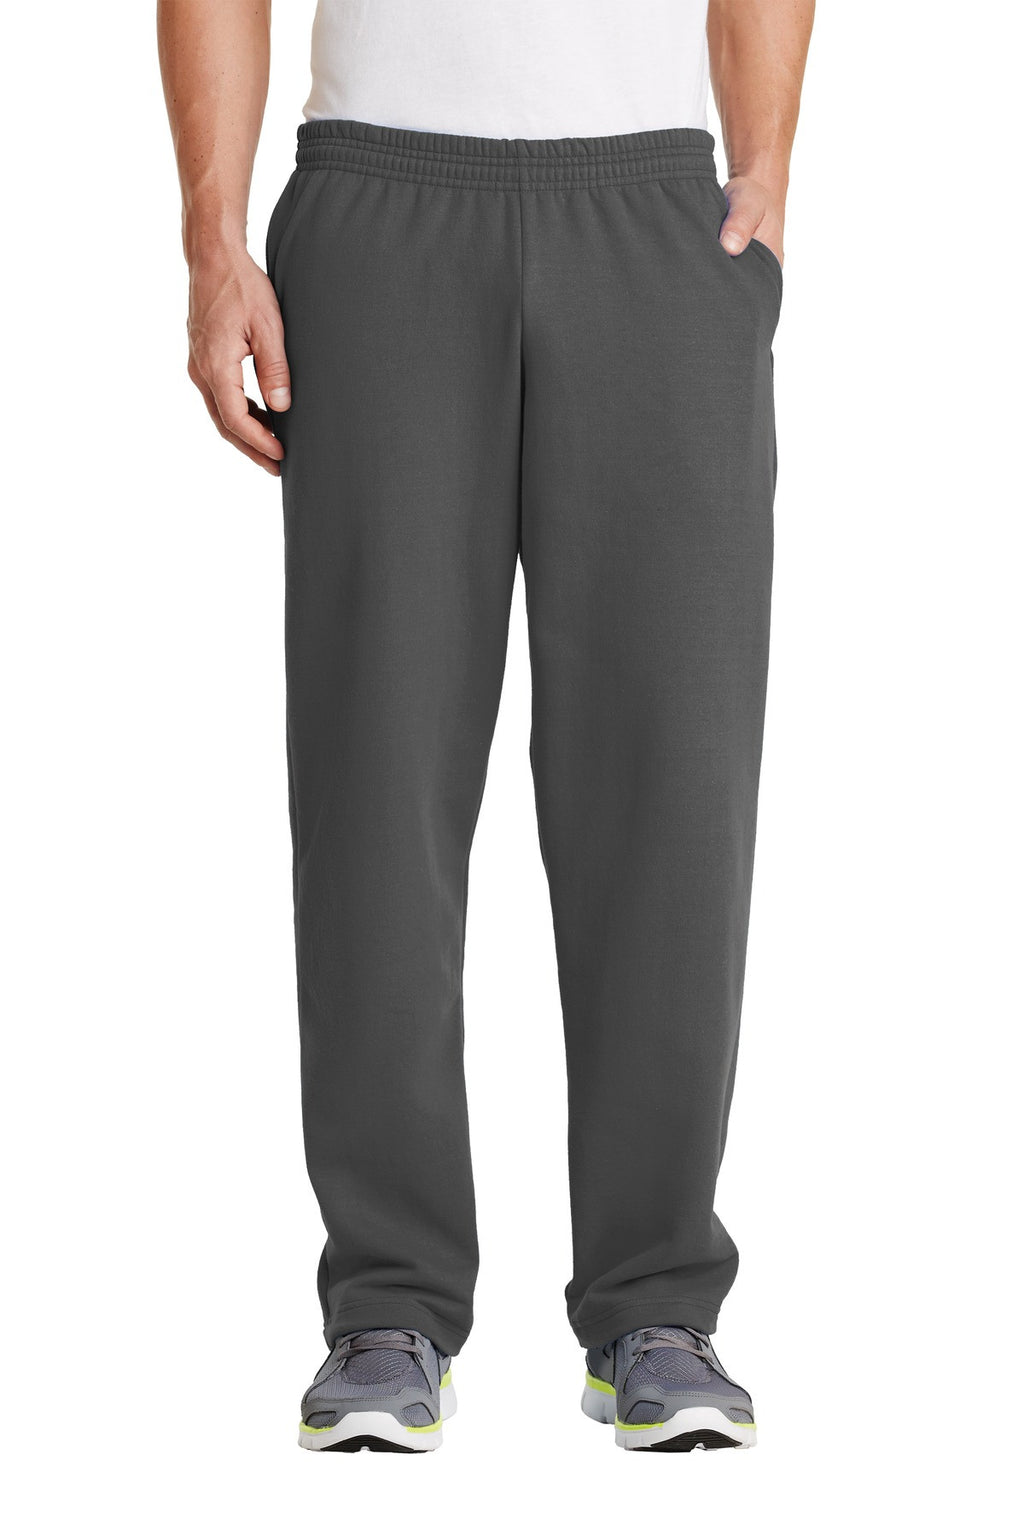 Port & Company Classic Open Bottom Sweatpant With Pockets-6